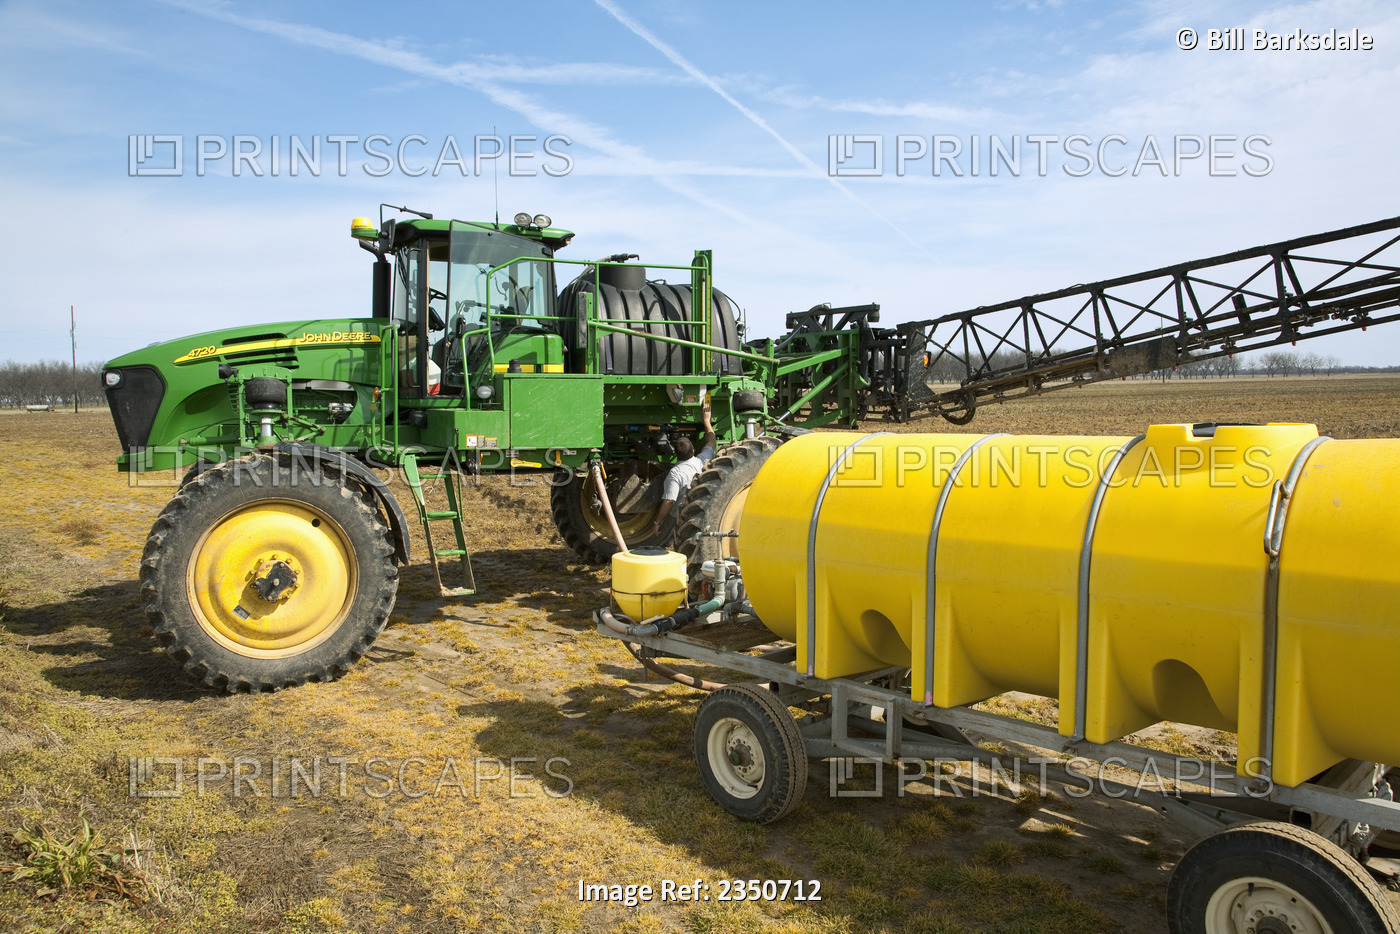 Agriculture - A farmer refills the chemical tank of his John Deere sprayer in ...